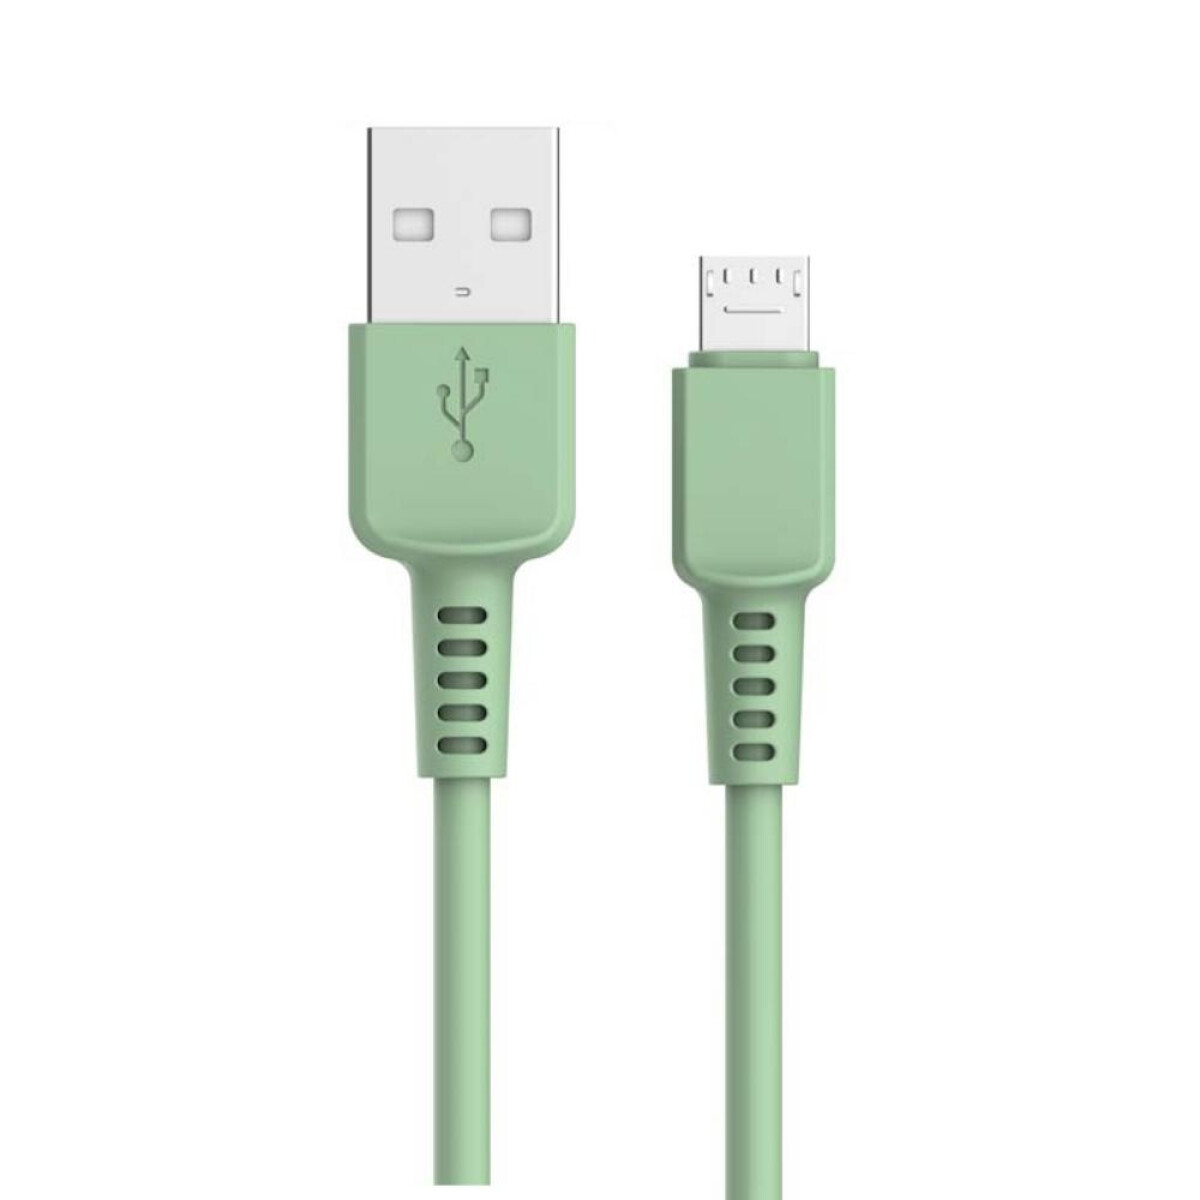 Cable USB PAH! Tipo Micro - Verde 